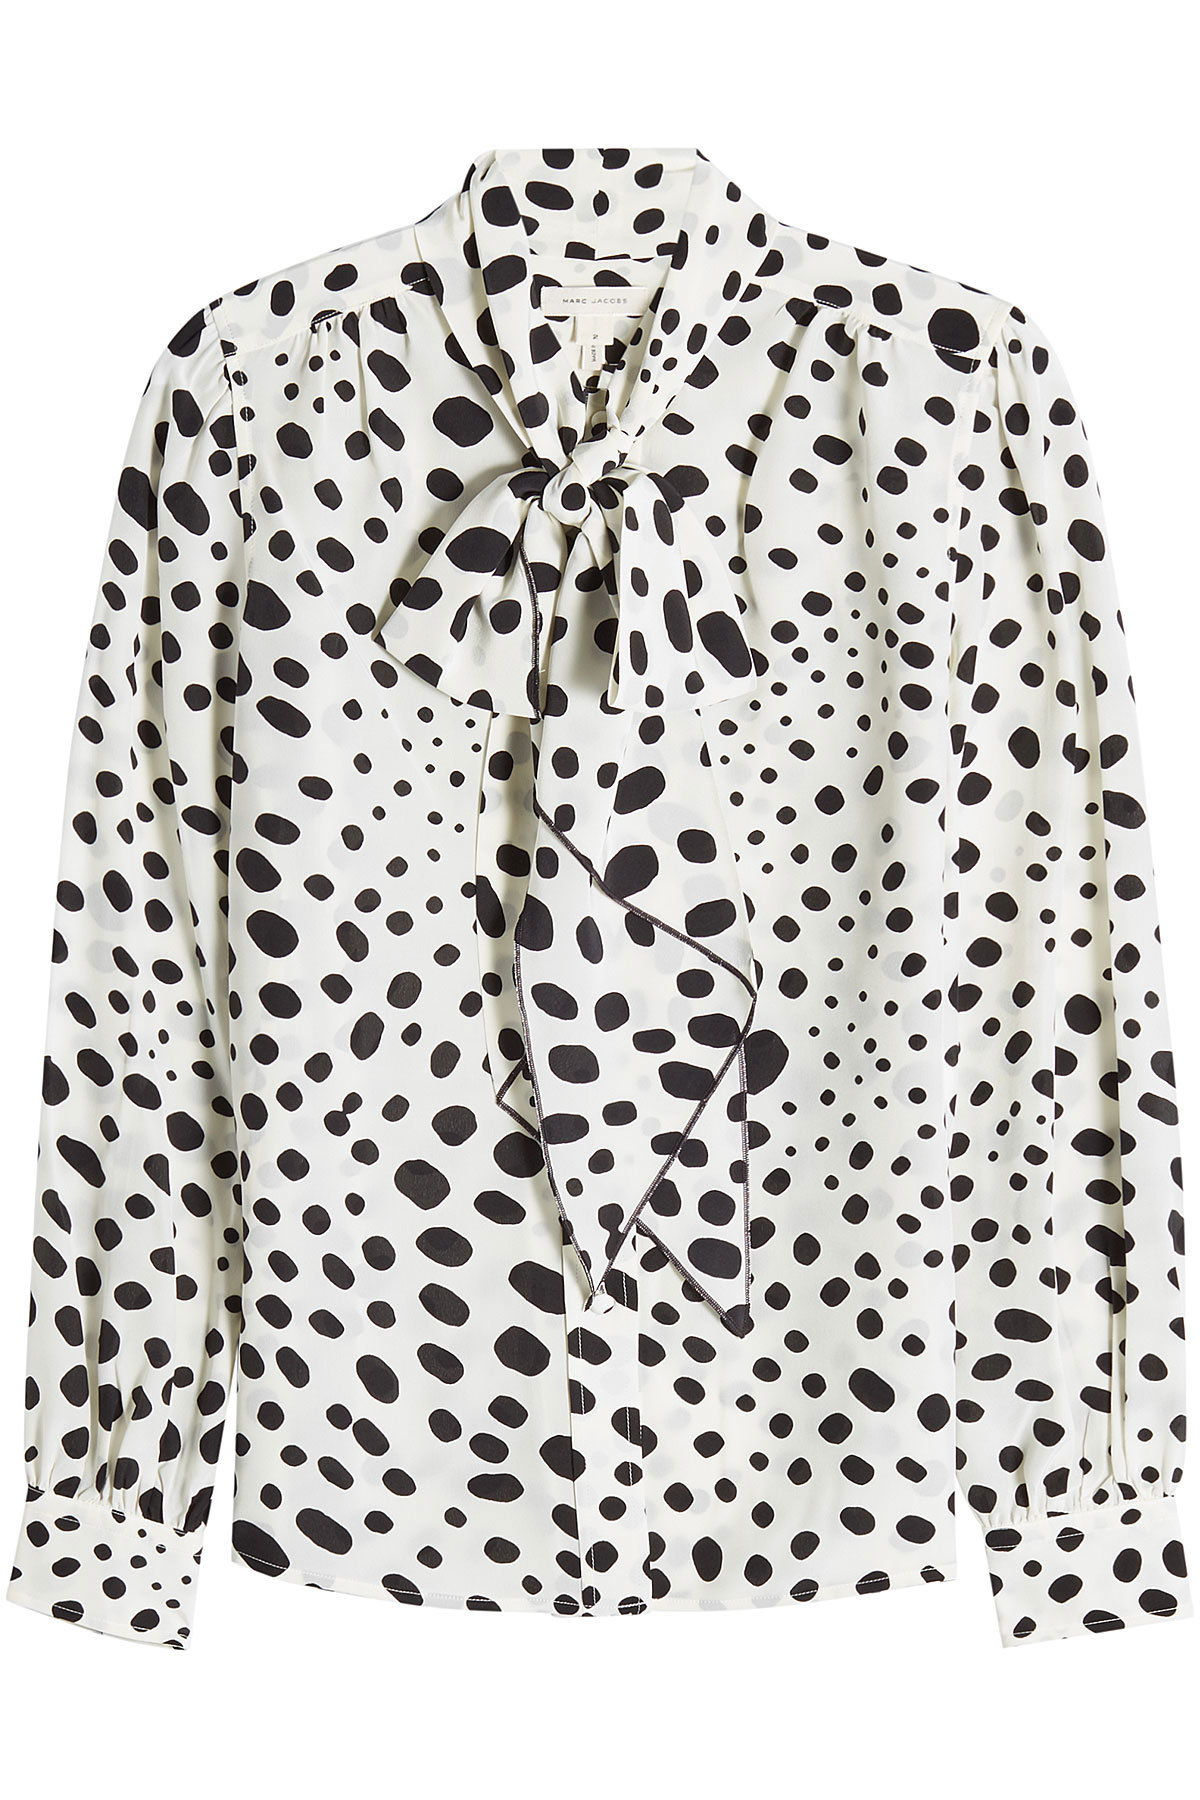 Marc Jacobs - Printed Silk Blouse with Pussy Bow